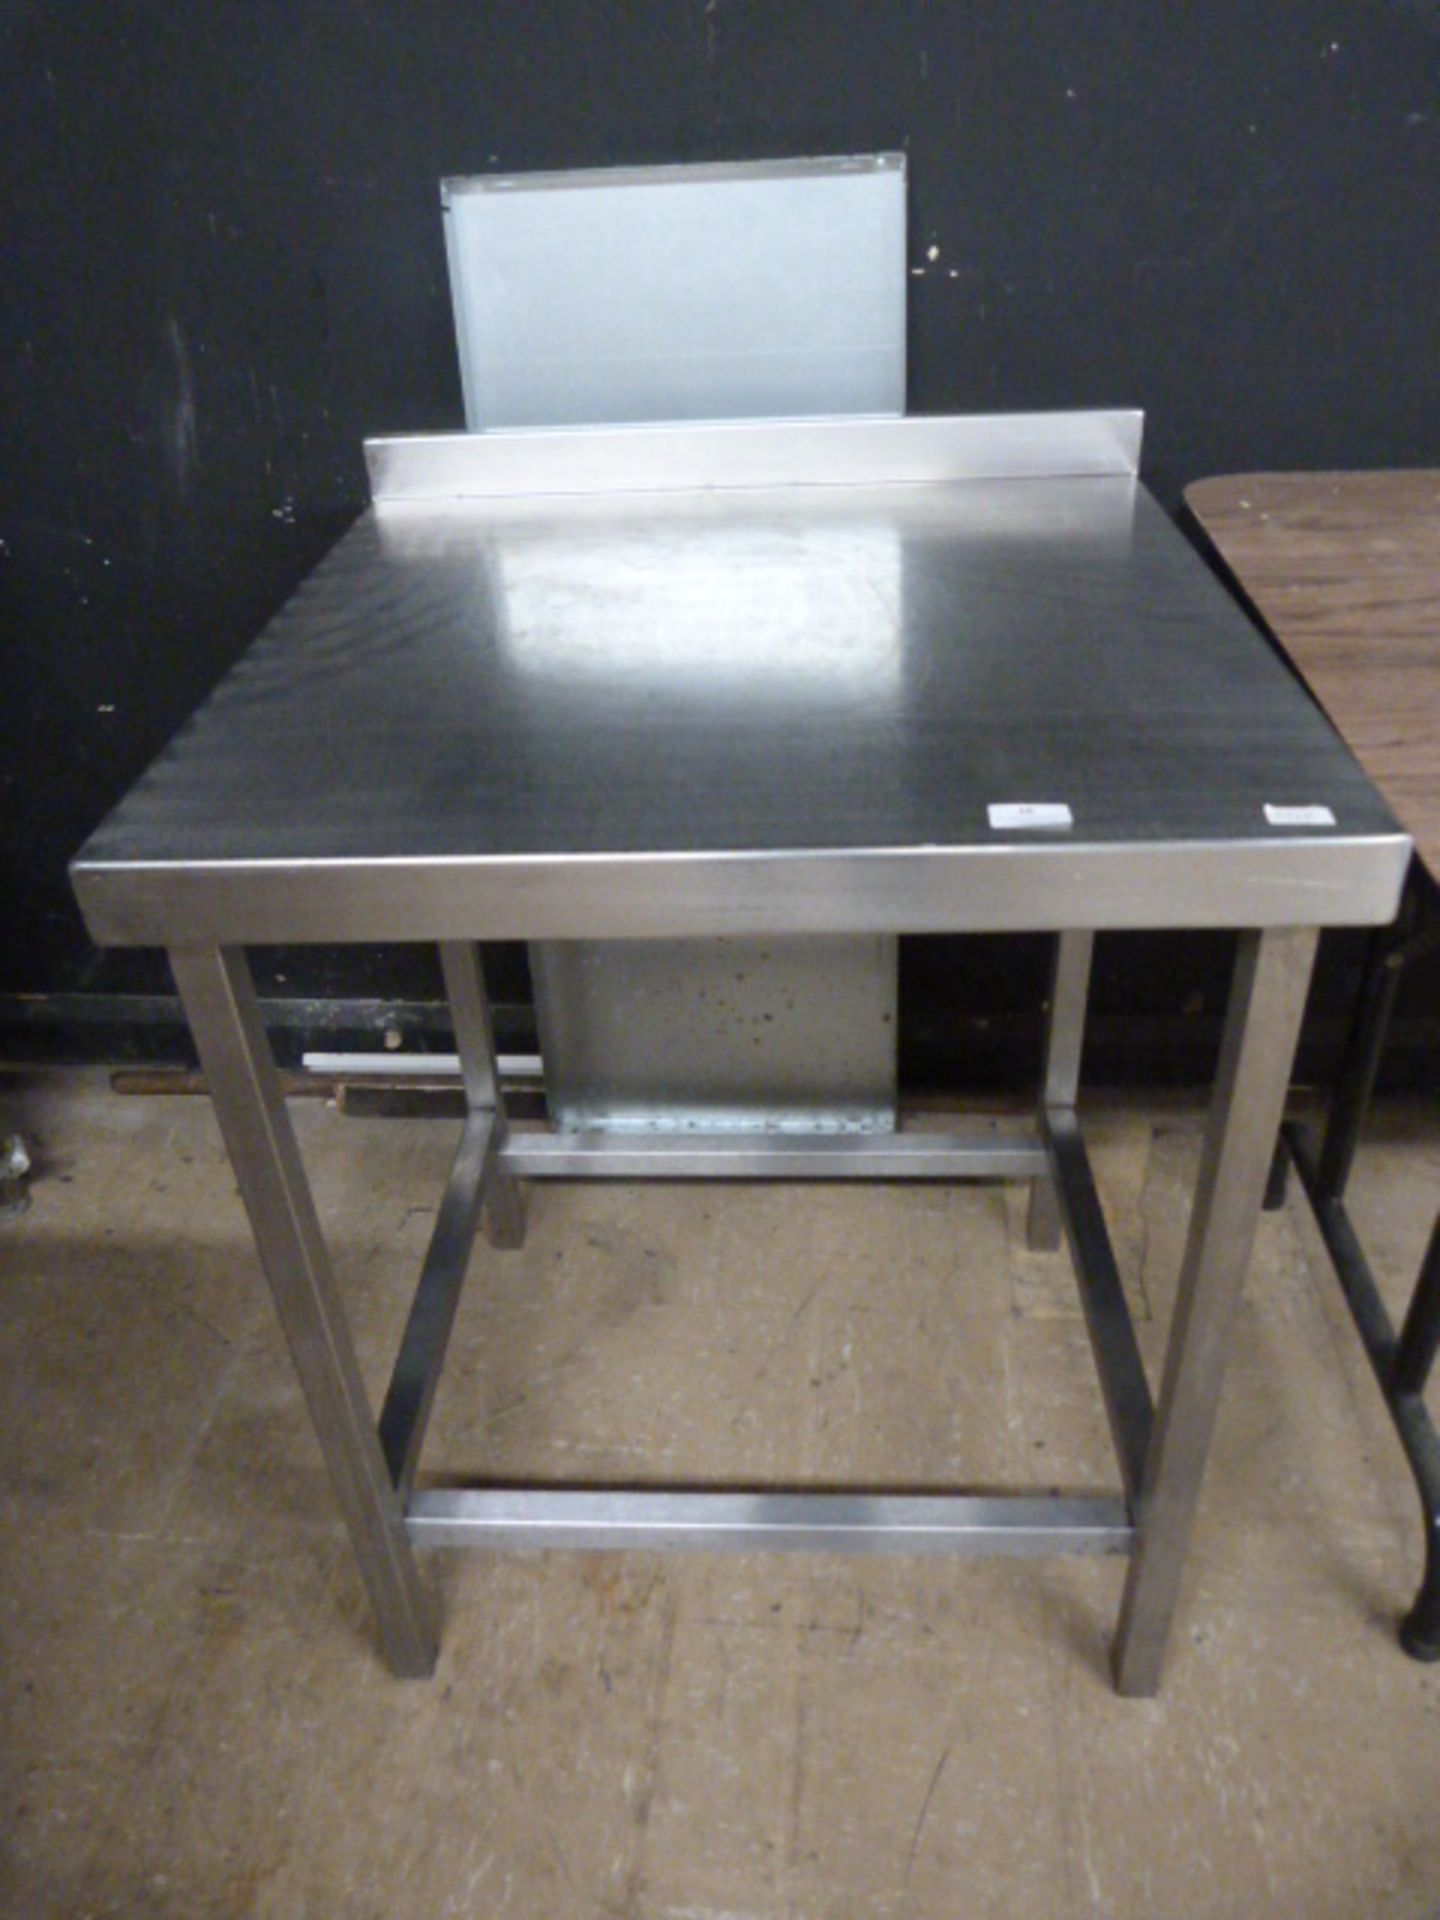 Stainless Steel Table with Shelf 25.5"x25.5"x30"